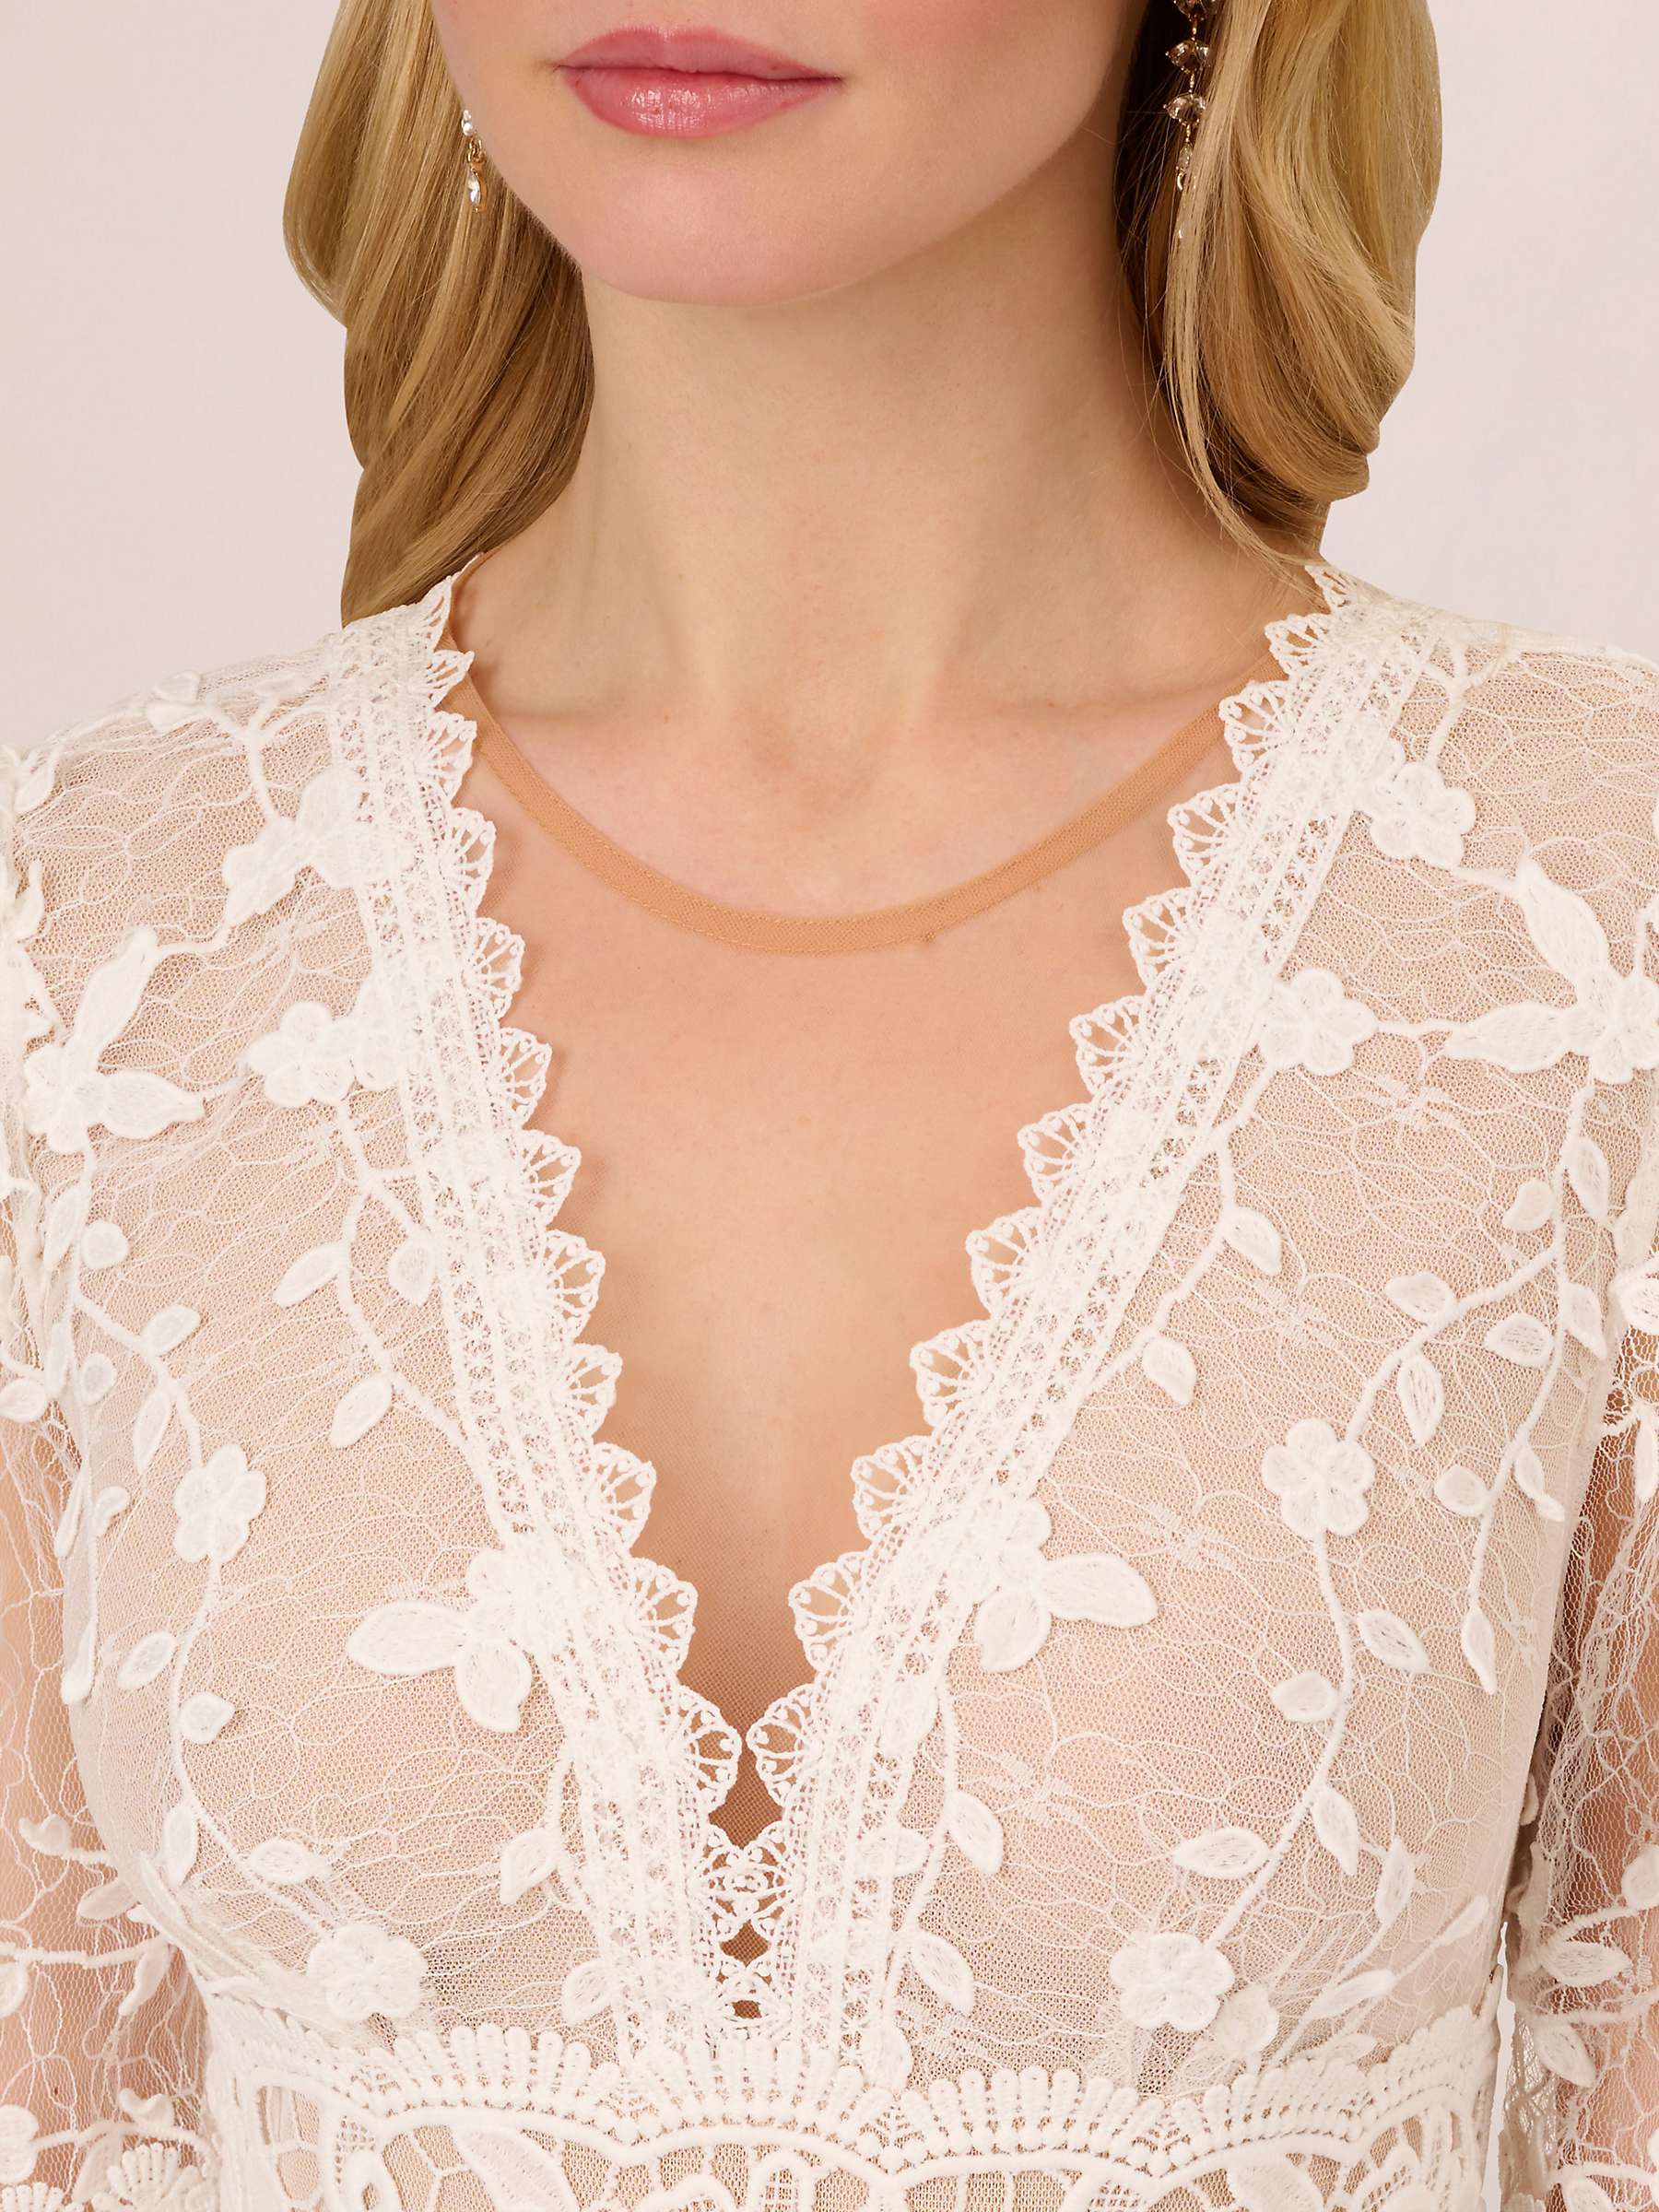 Buy Adrianna Papell Lace Embroidery Mini Dress Online at johnlewis.com